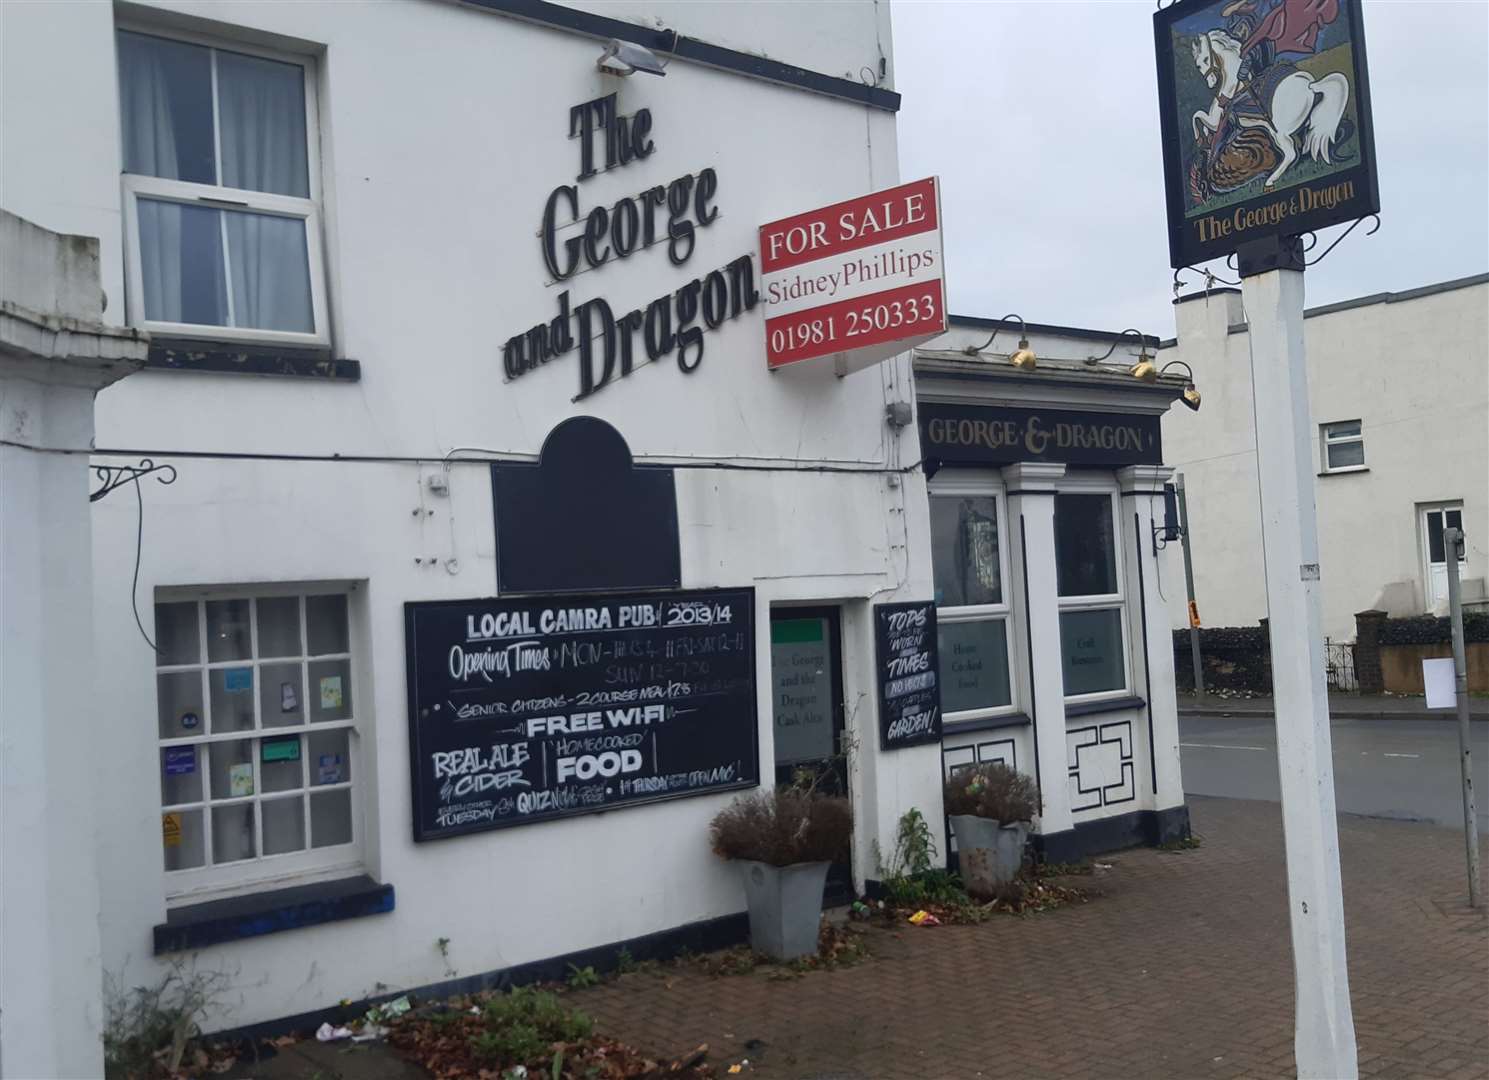 The George and Dragon Pub in Swanscombe was put back up for sale last year